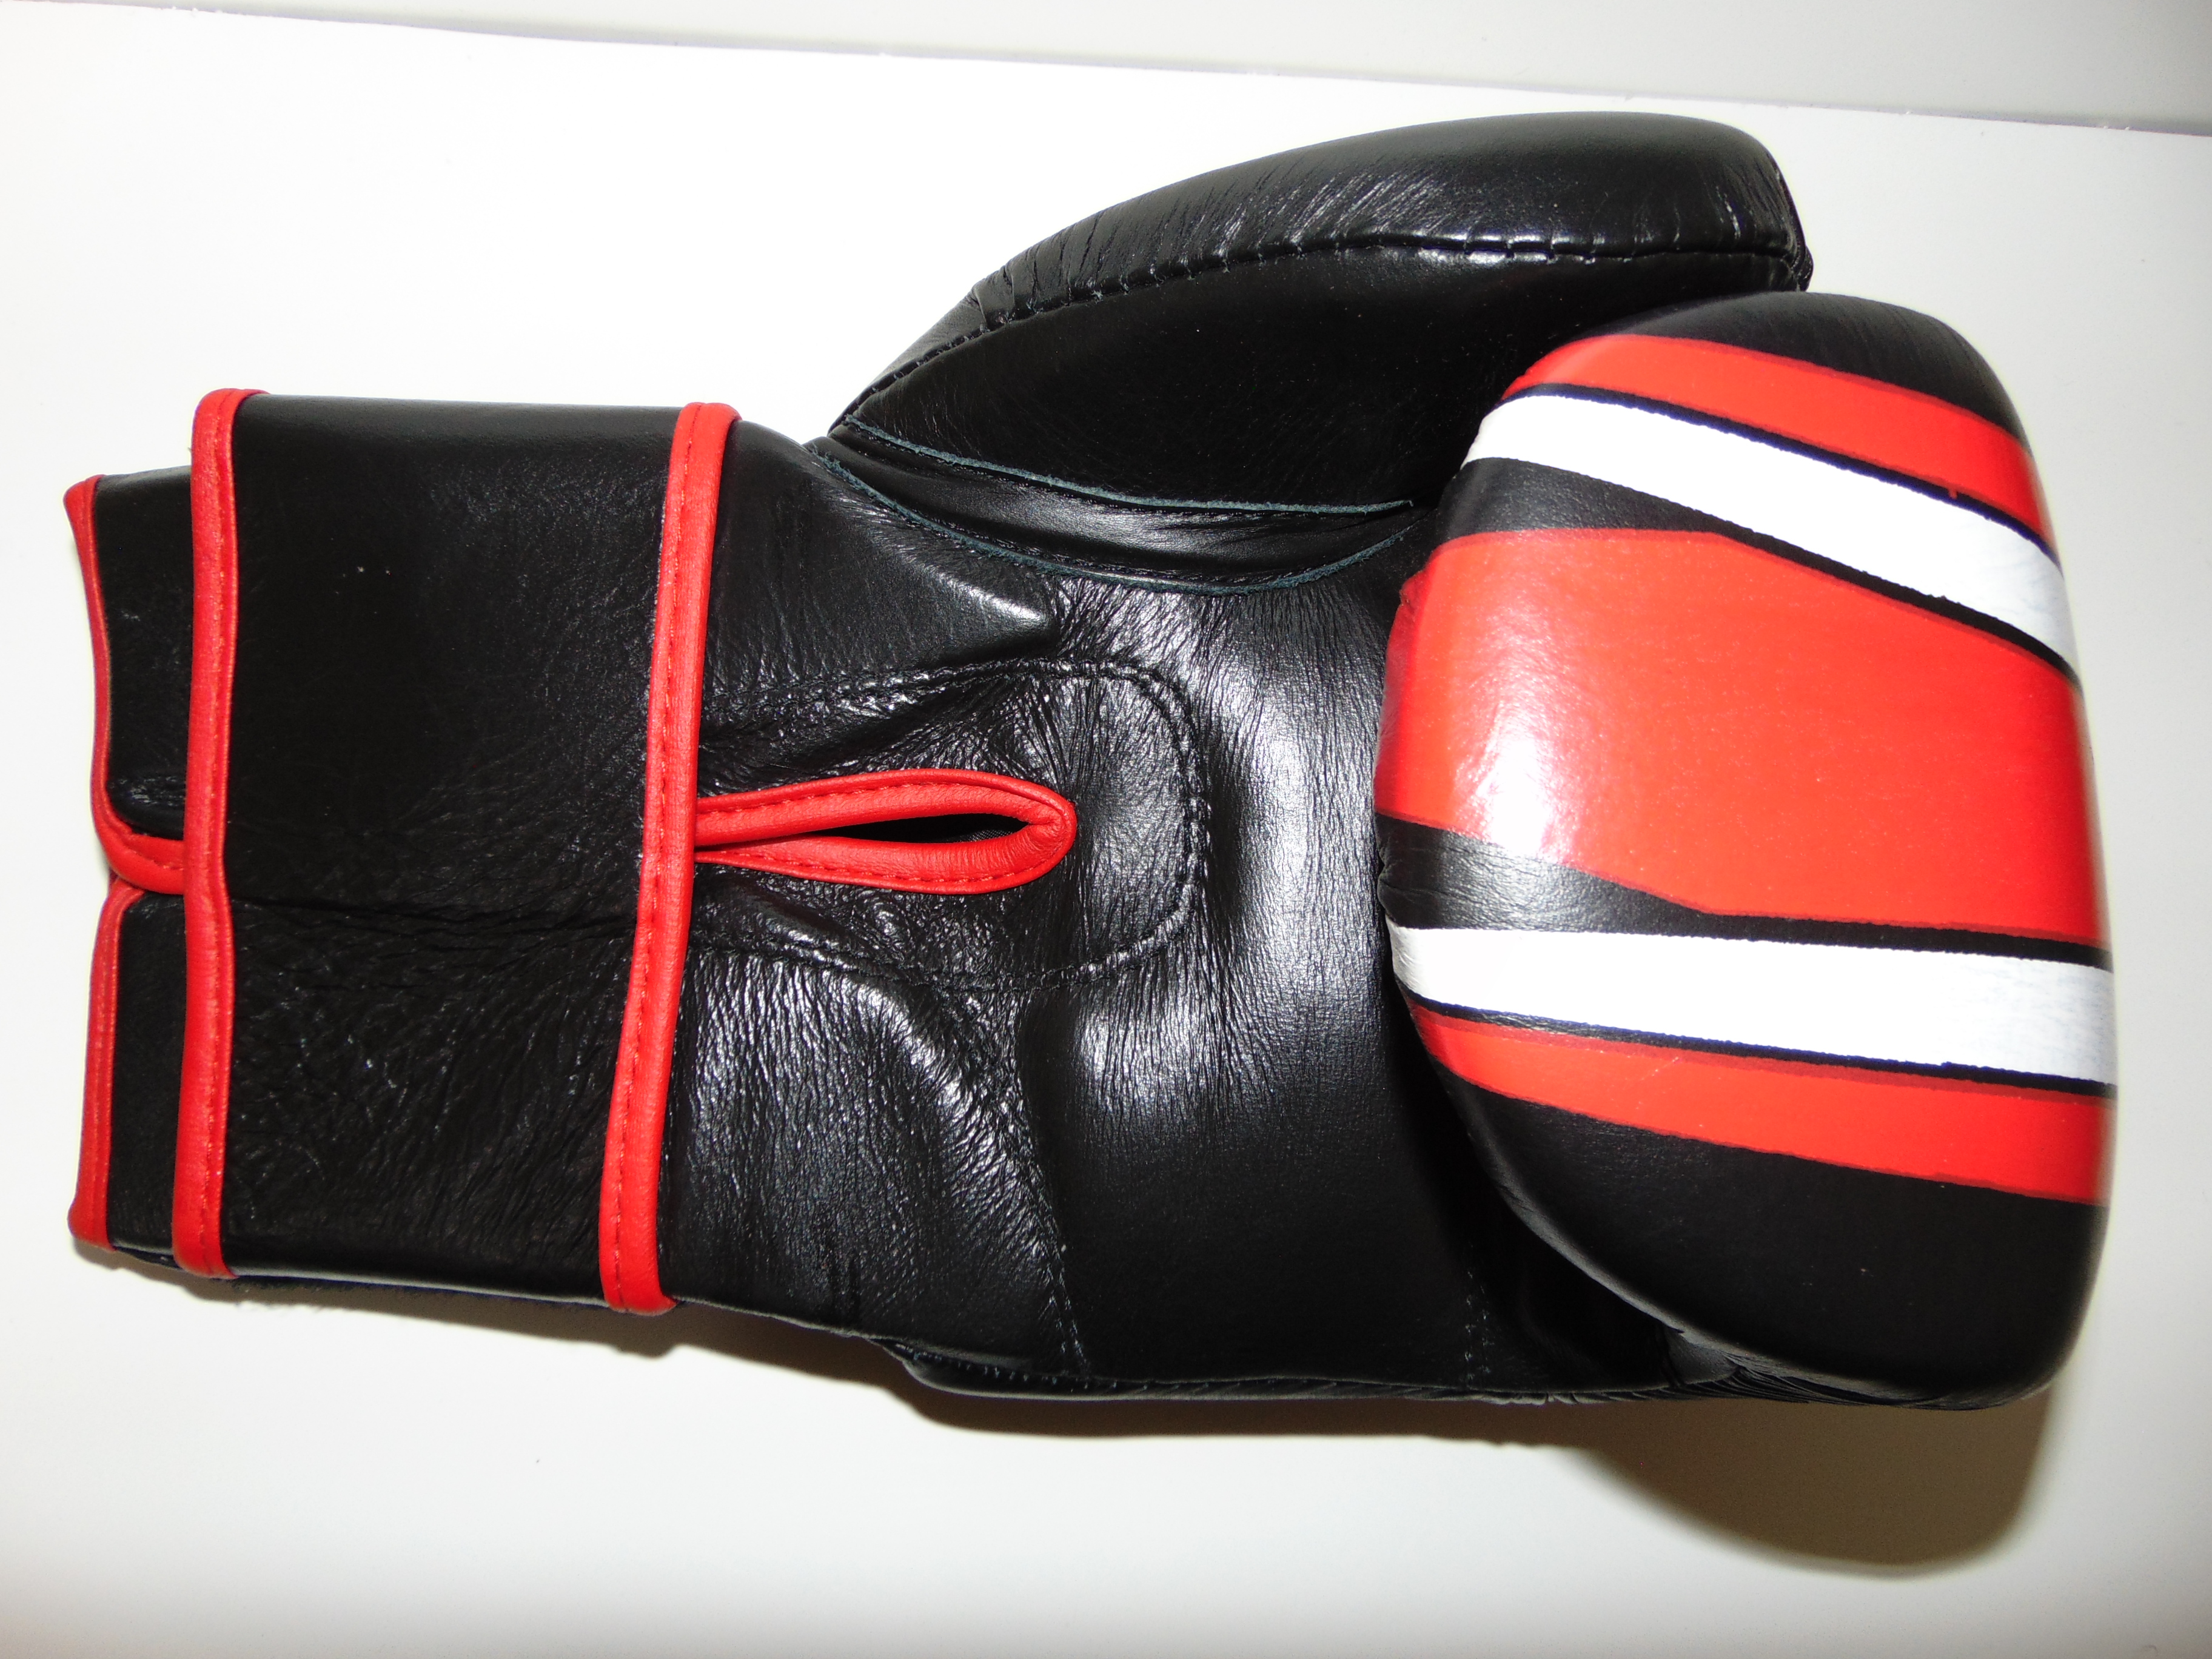 Boxing Gloves Rex PU Leather 12 oz adult